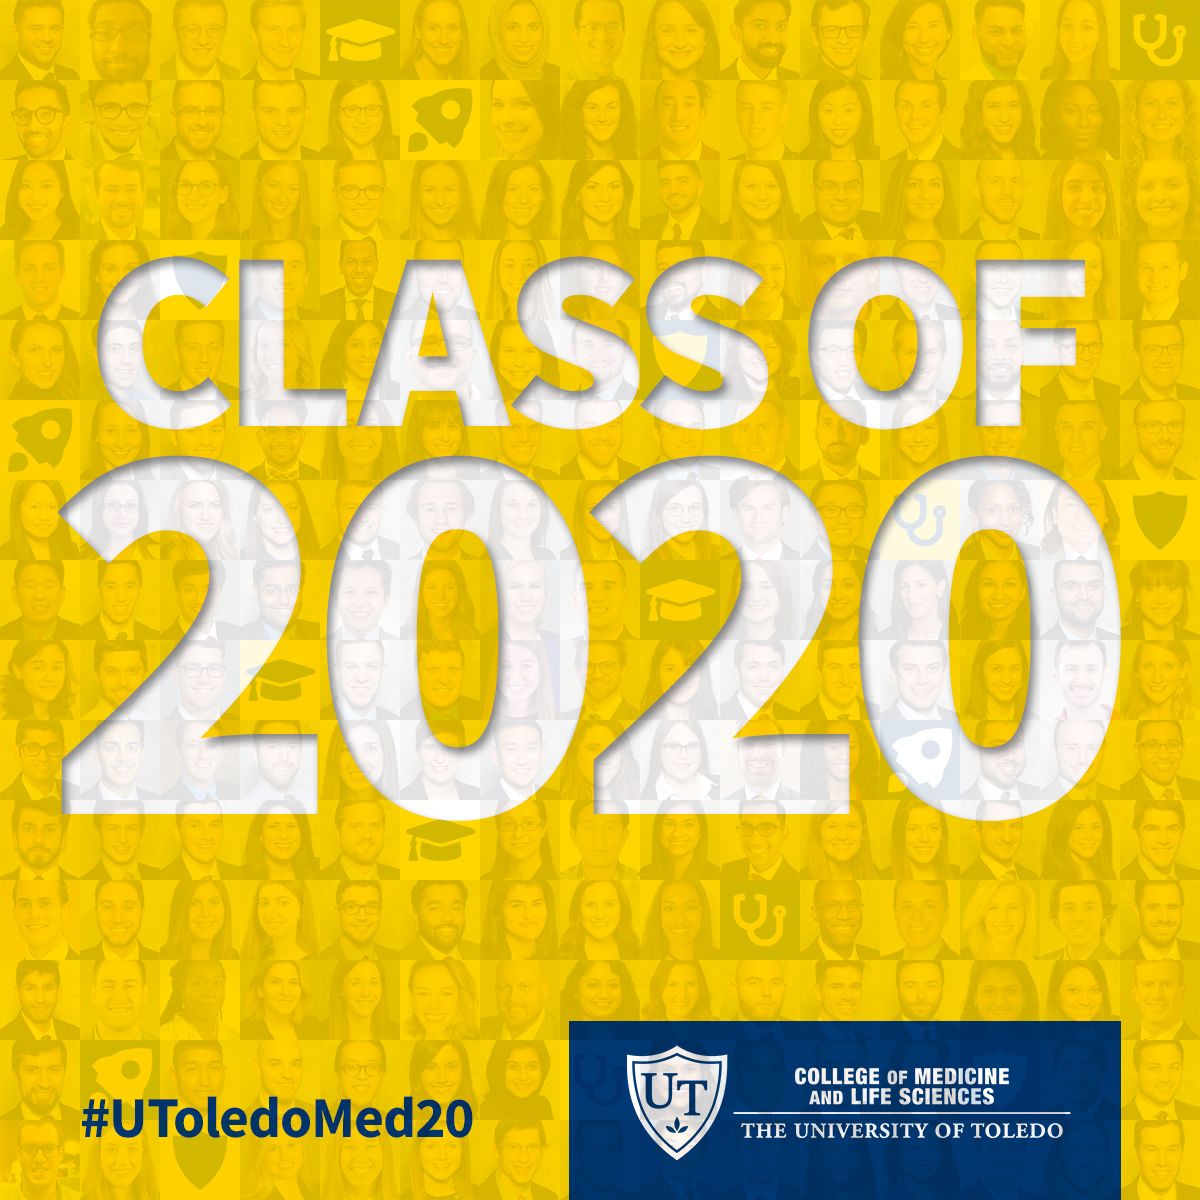 Class of 2020 sign